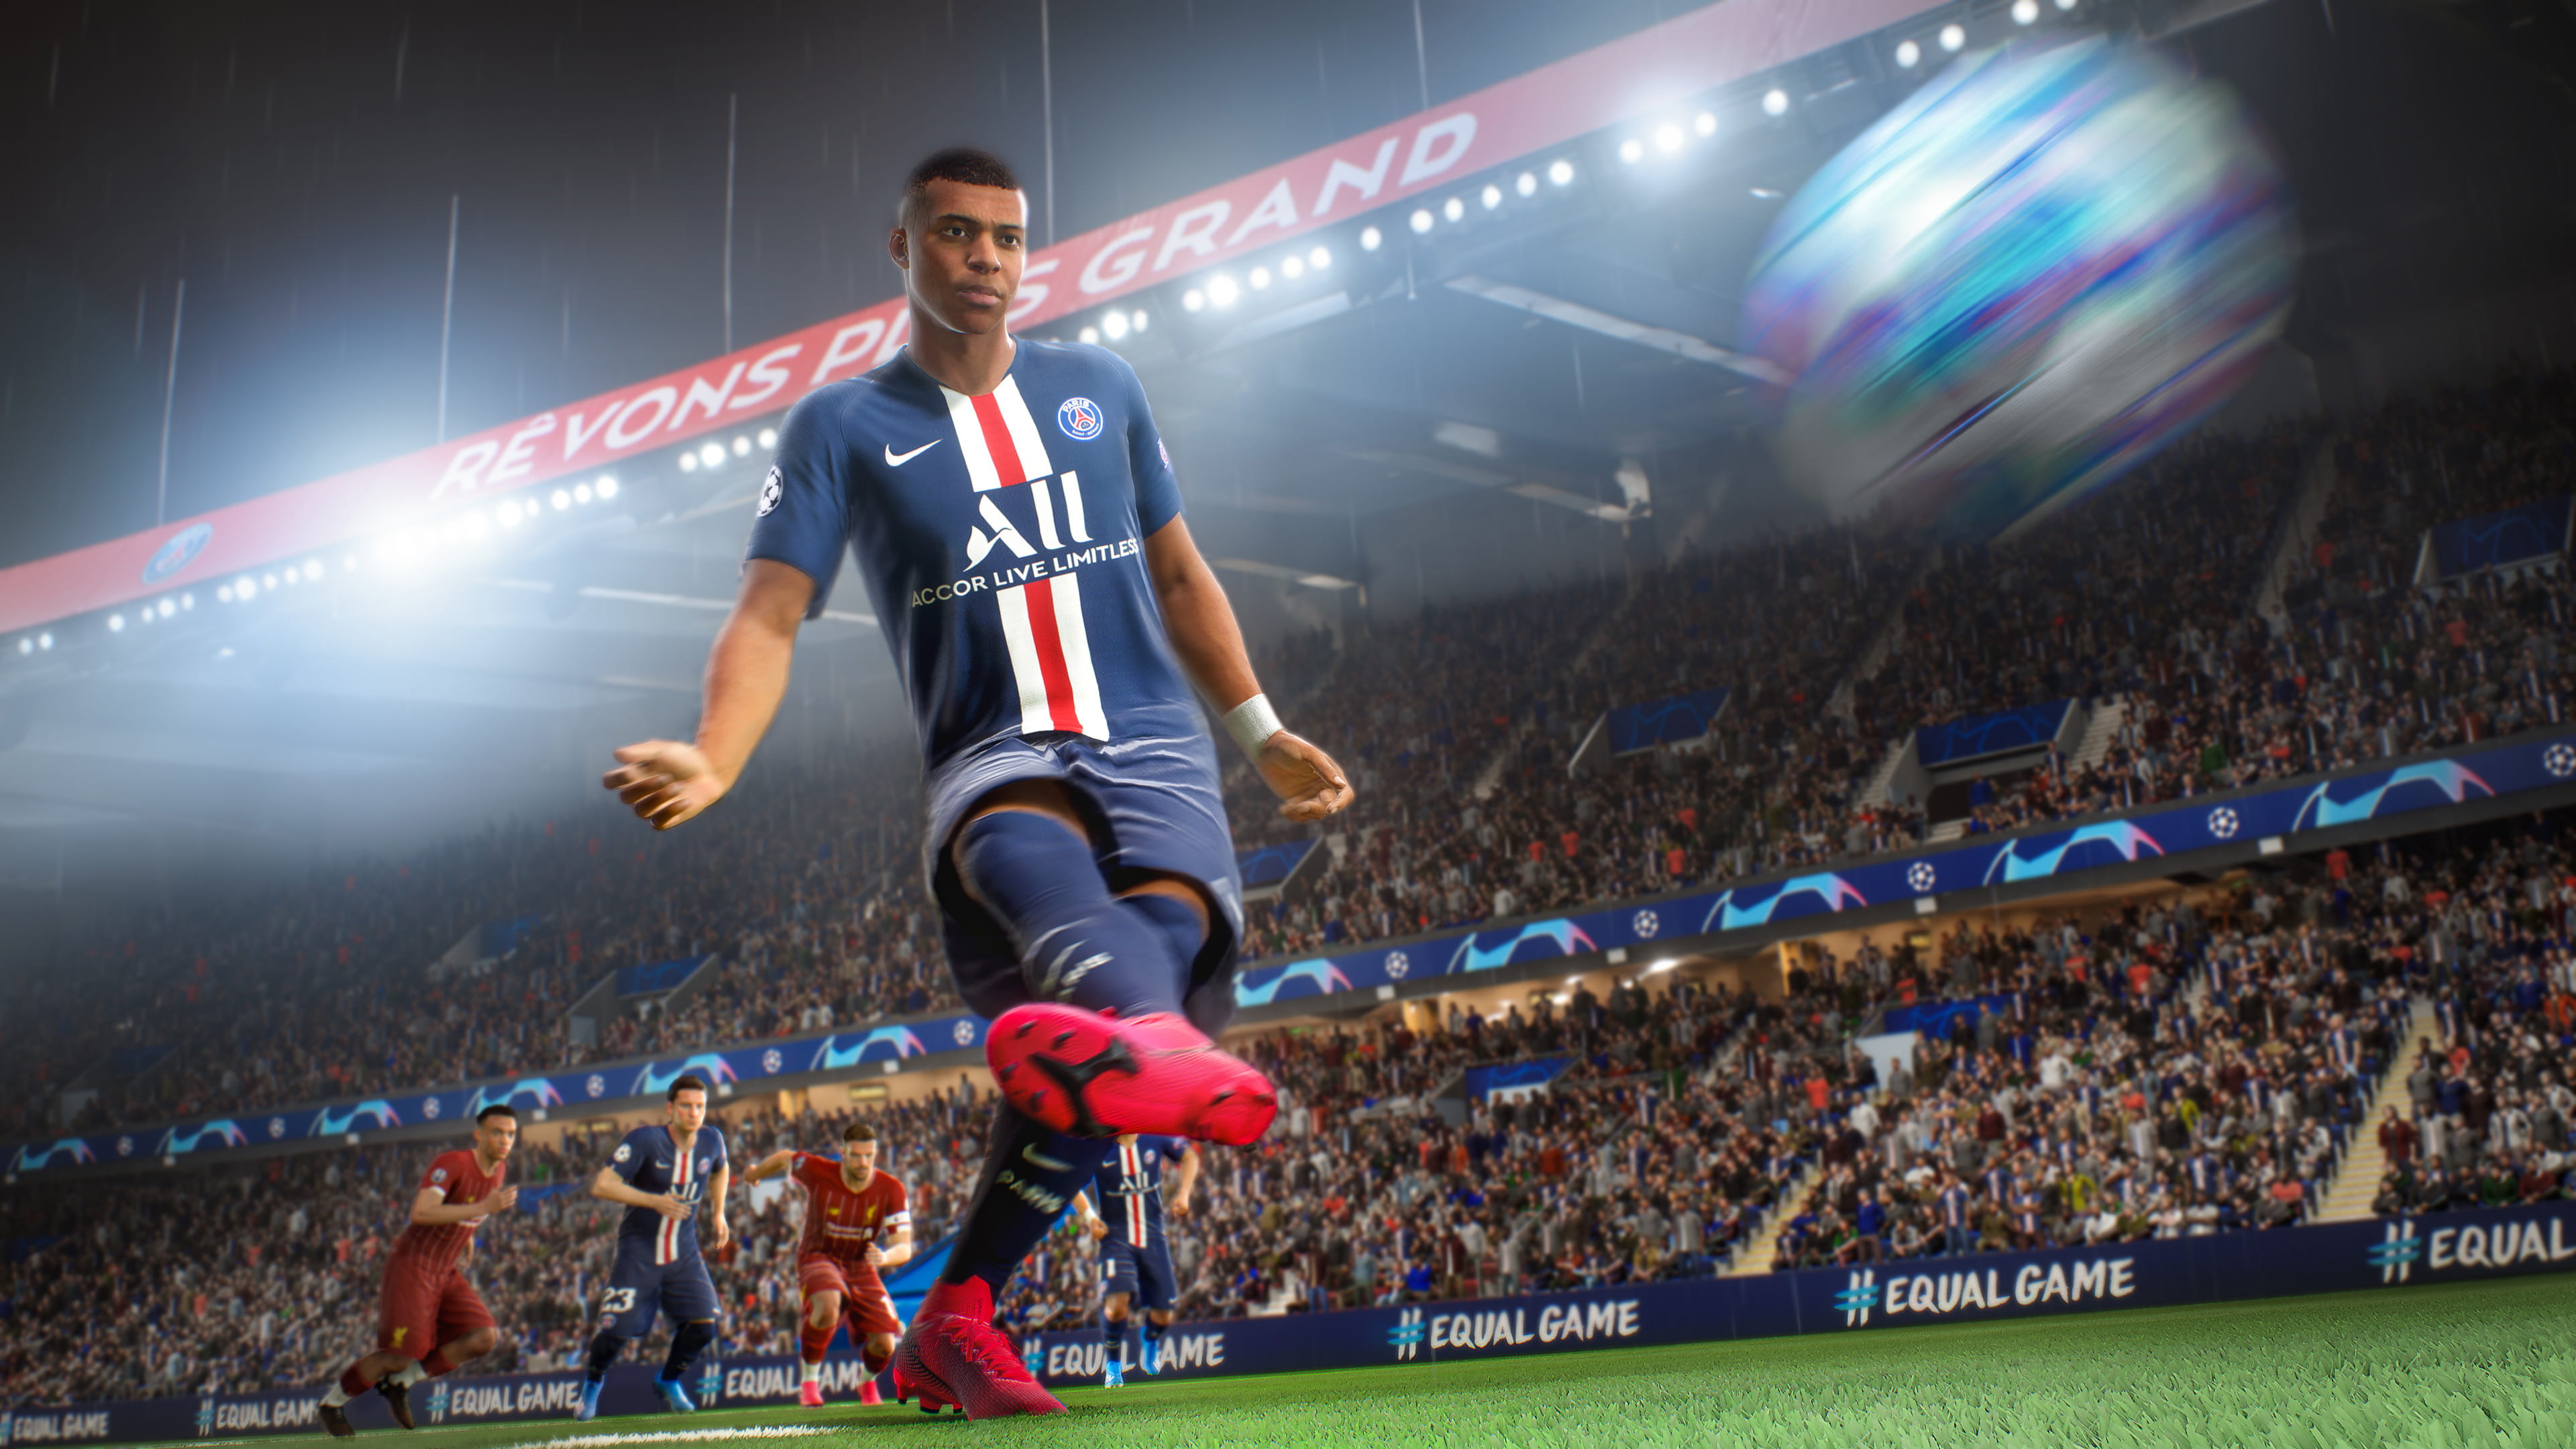 Prime Day 2020 deals: FIFA 21, Xbox, GTA 5, FF7R, F1 2020, PC gaming  gear sale, Gaming, Entertainment